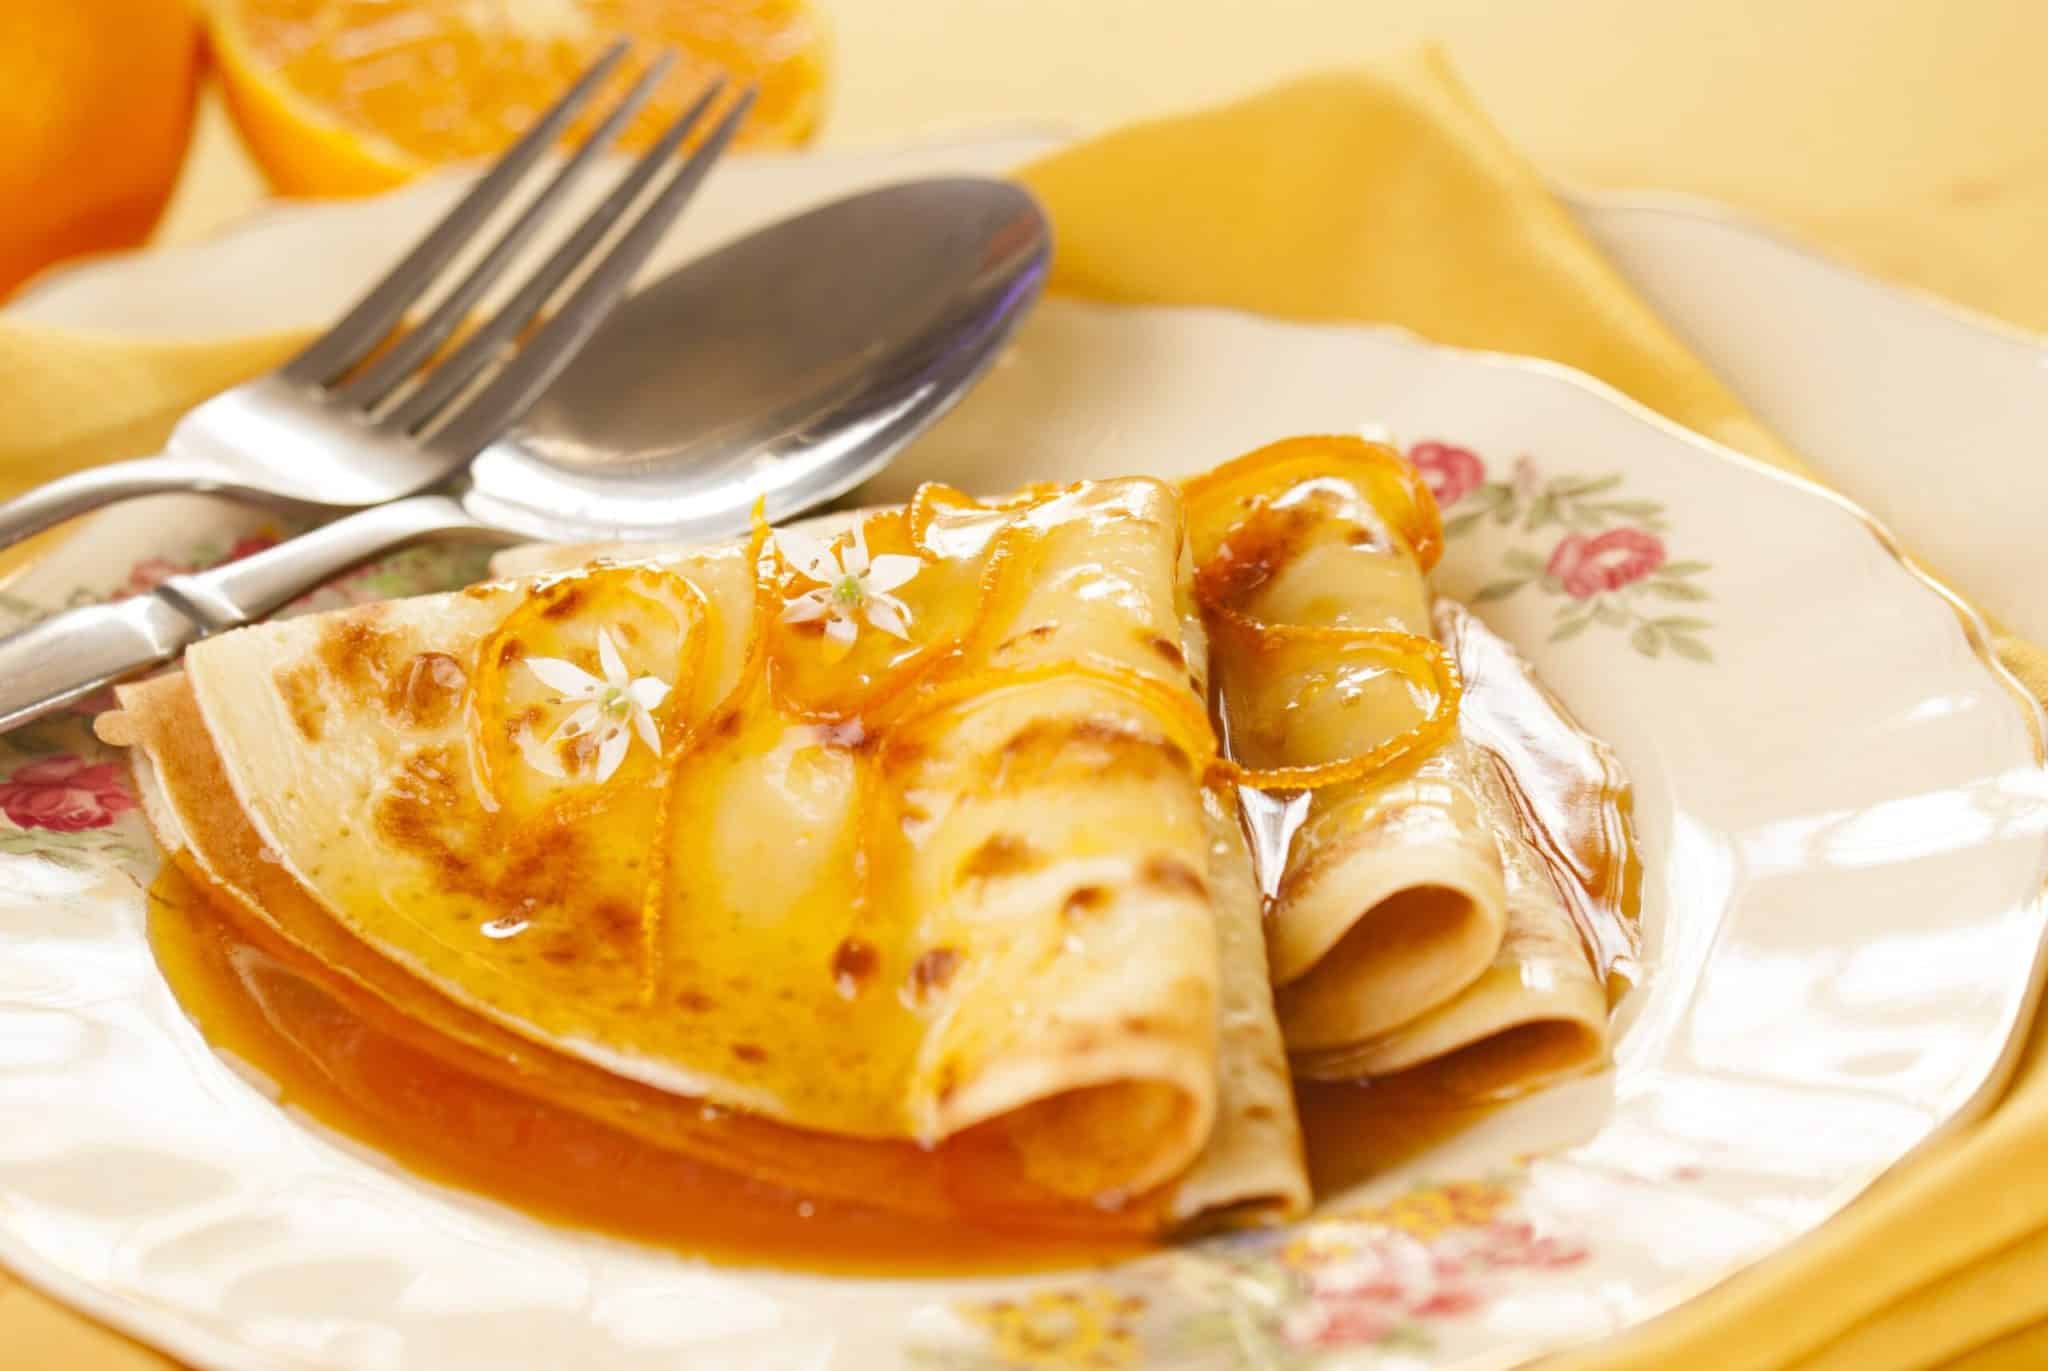 Crepes susette scaled.jpg